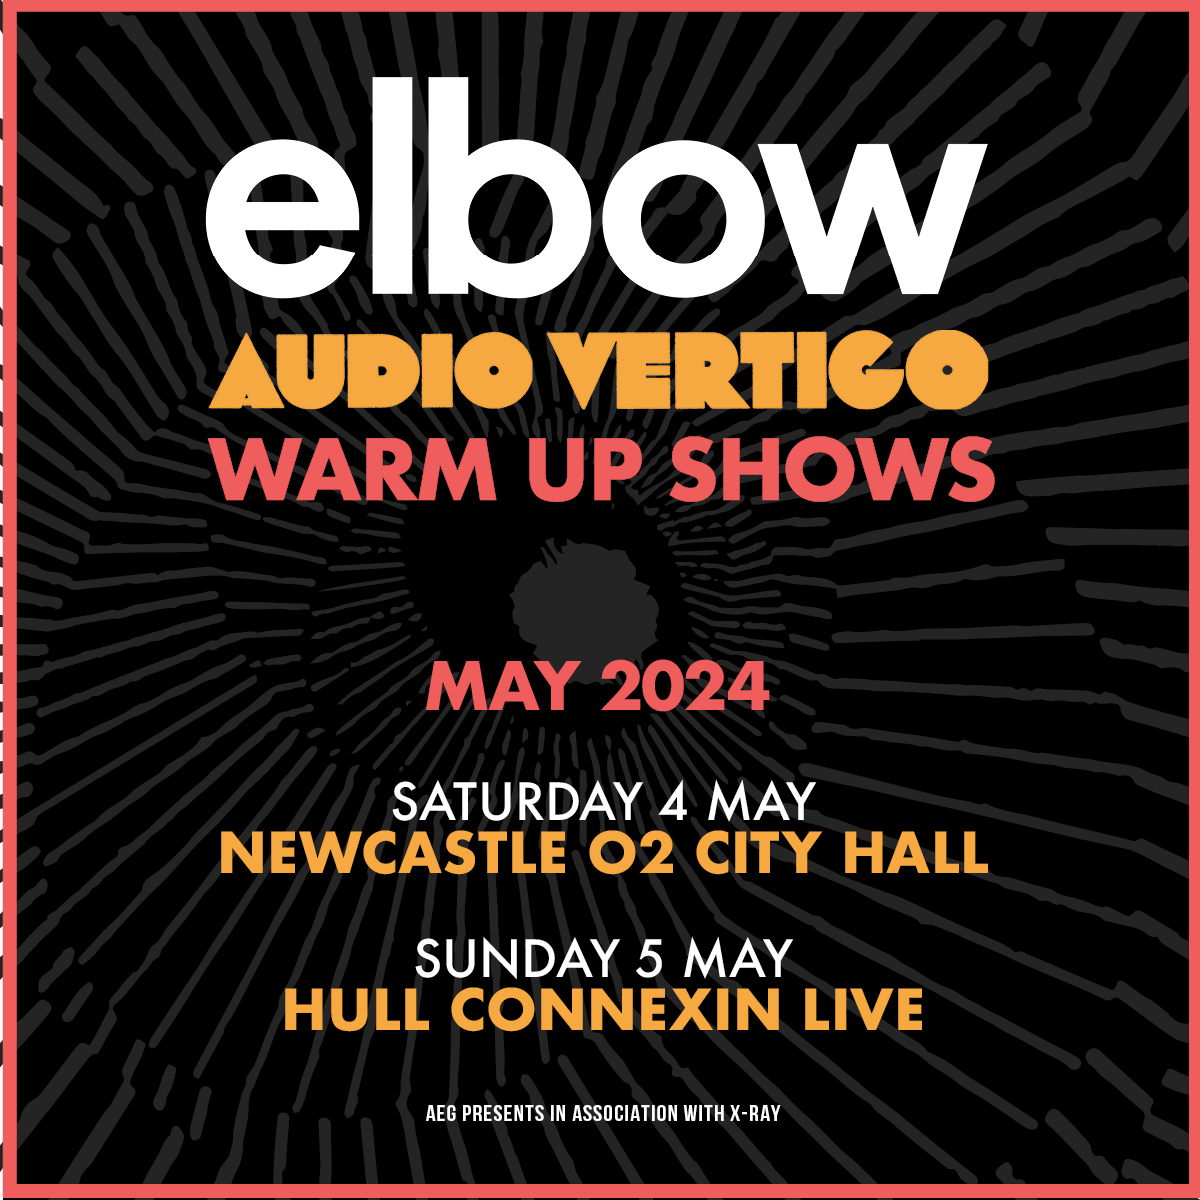 Tonight @Elbow are here for for a warm up show before the 'AUDIO VERTIGO' tour starts 🙌 With support from @JescaHoop. Doors at 7pm. Our usual security measures are in place - no bags bigger than A4 - please check our pinned tweet for details 🙏